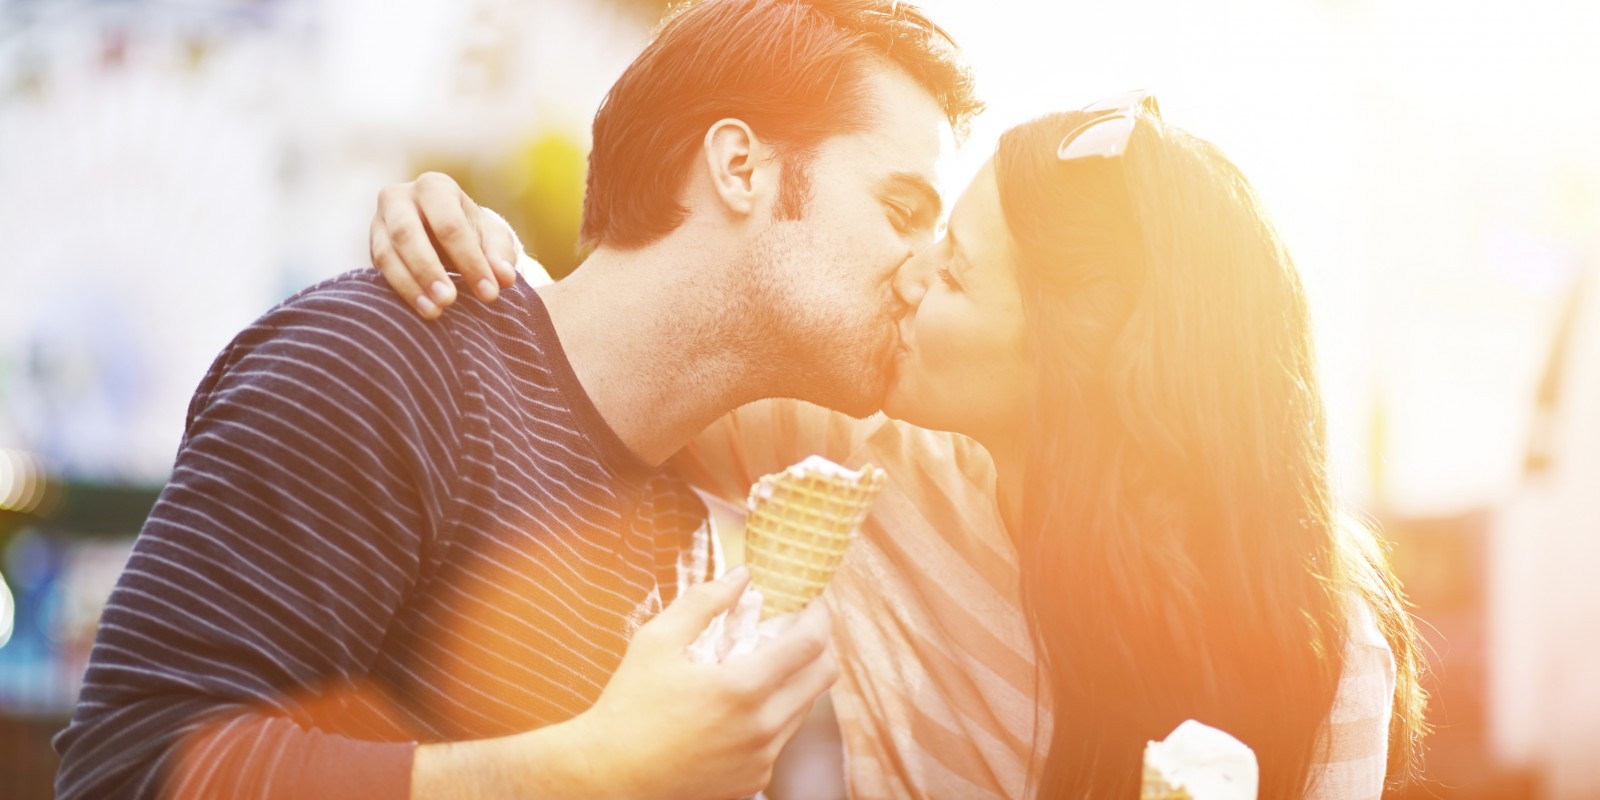 I Want To Kiss You Quotes - Romantic Couple Kiss 